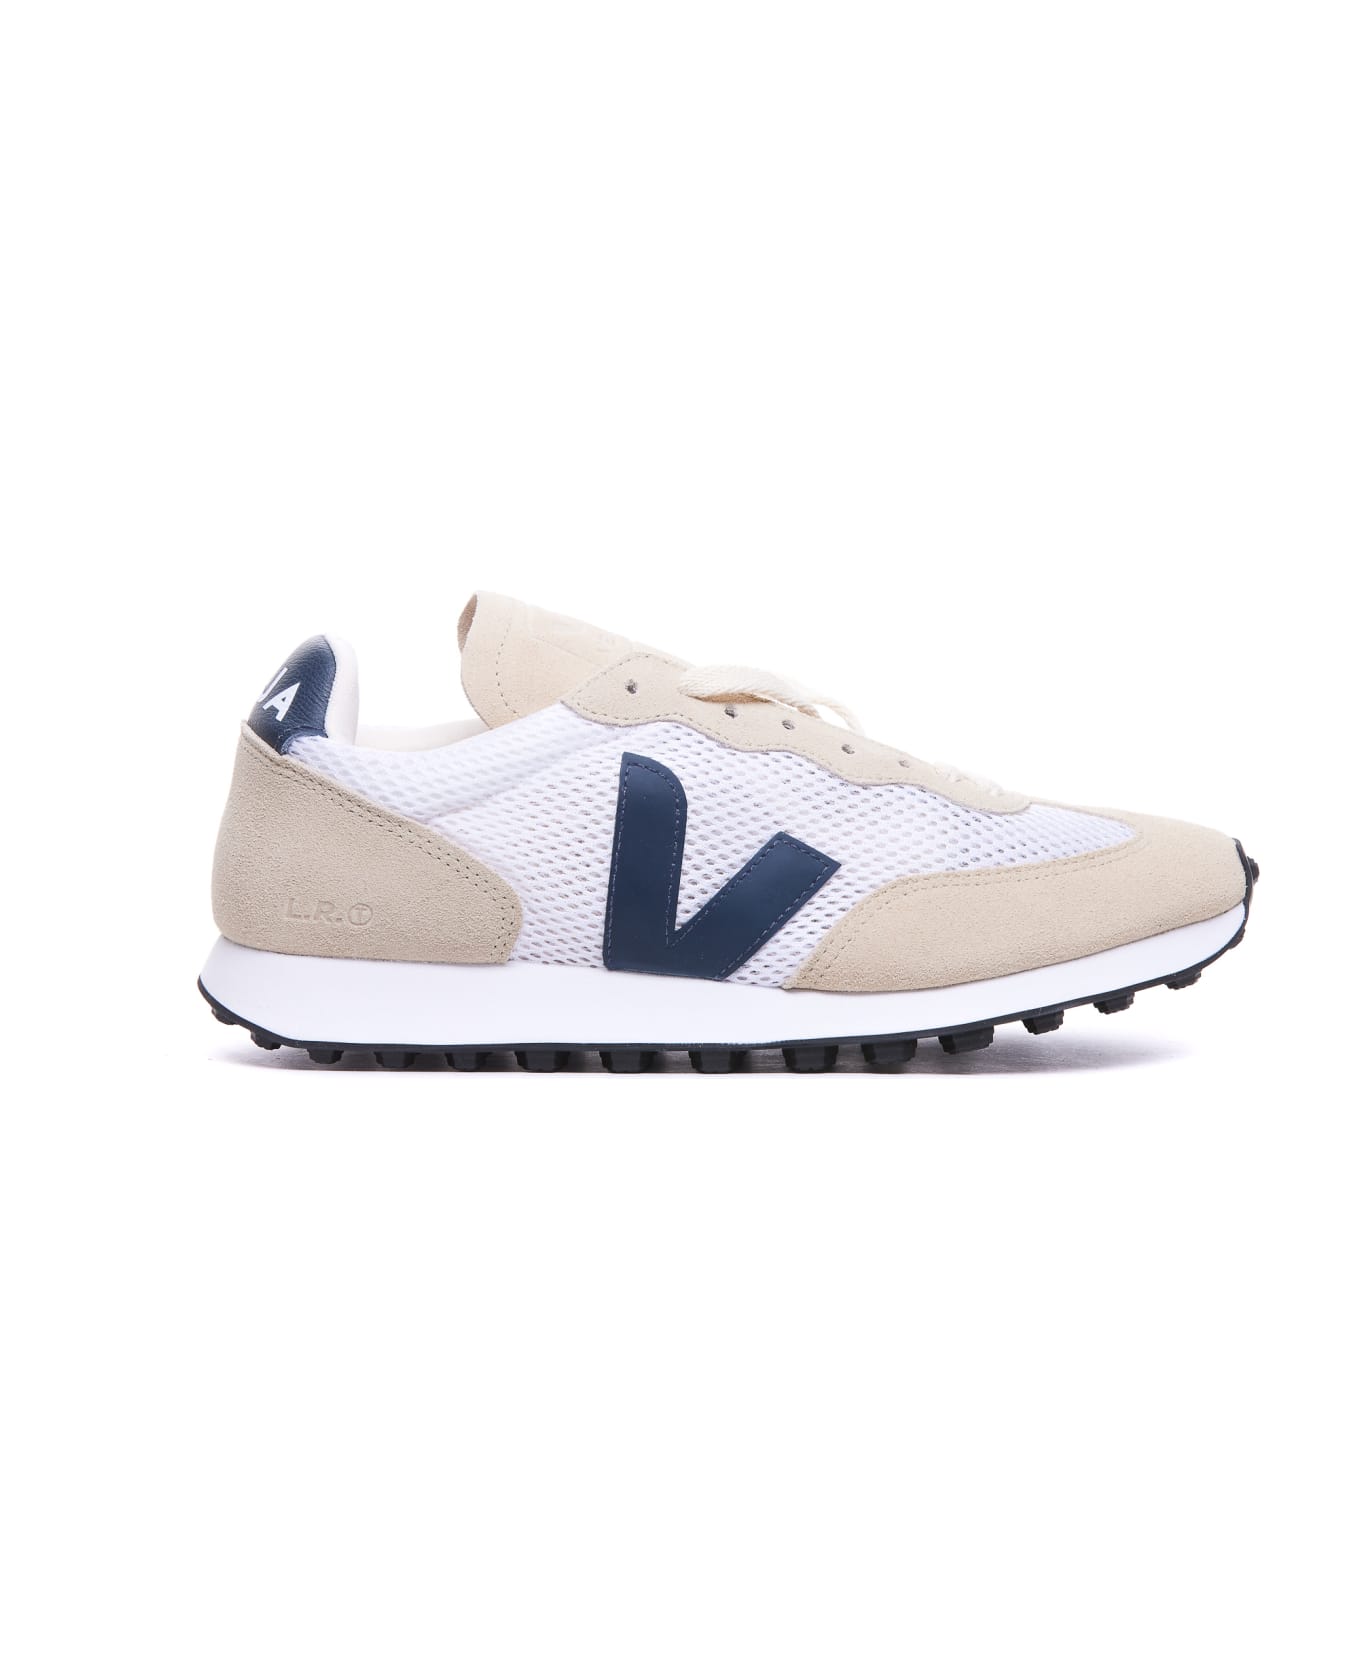 Veja Rio Branco Light Aircell Sneakers - Beige